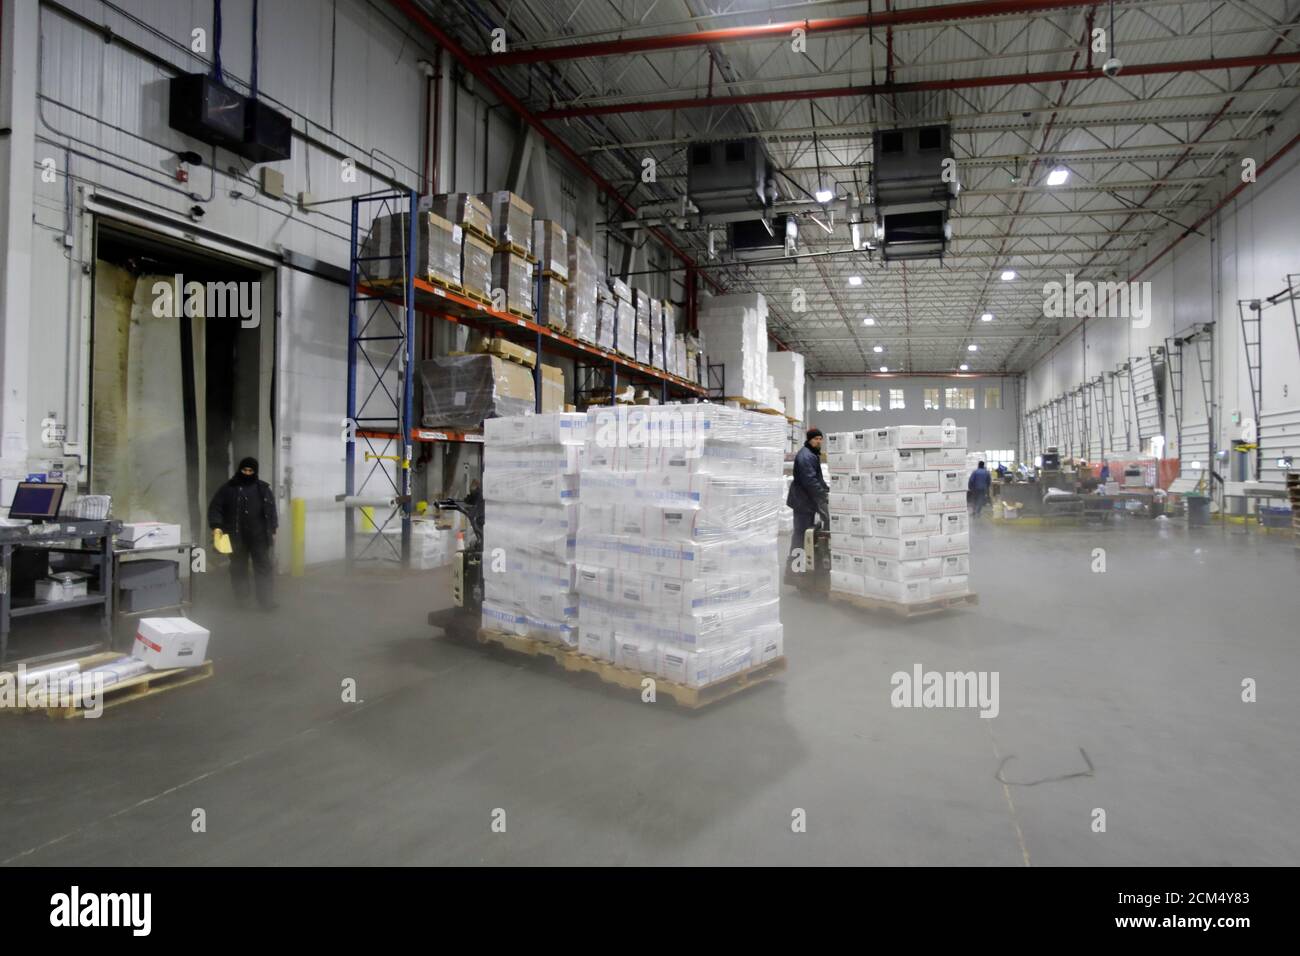 A Forklift Operator Moves A Pallet Of Imported Frozen Seafood From China Inside The Refrigerated Warehouse